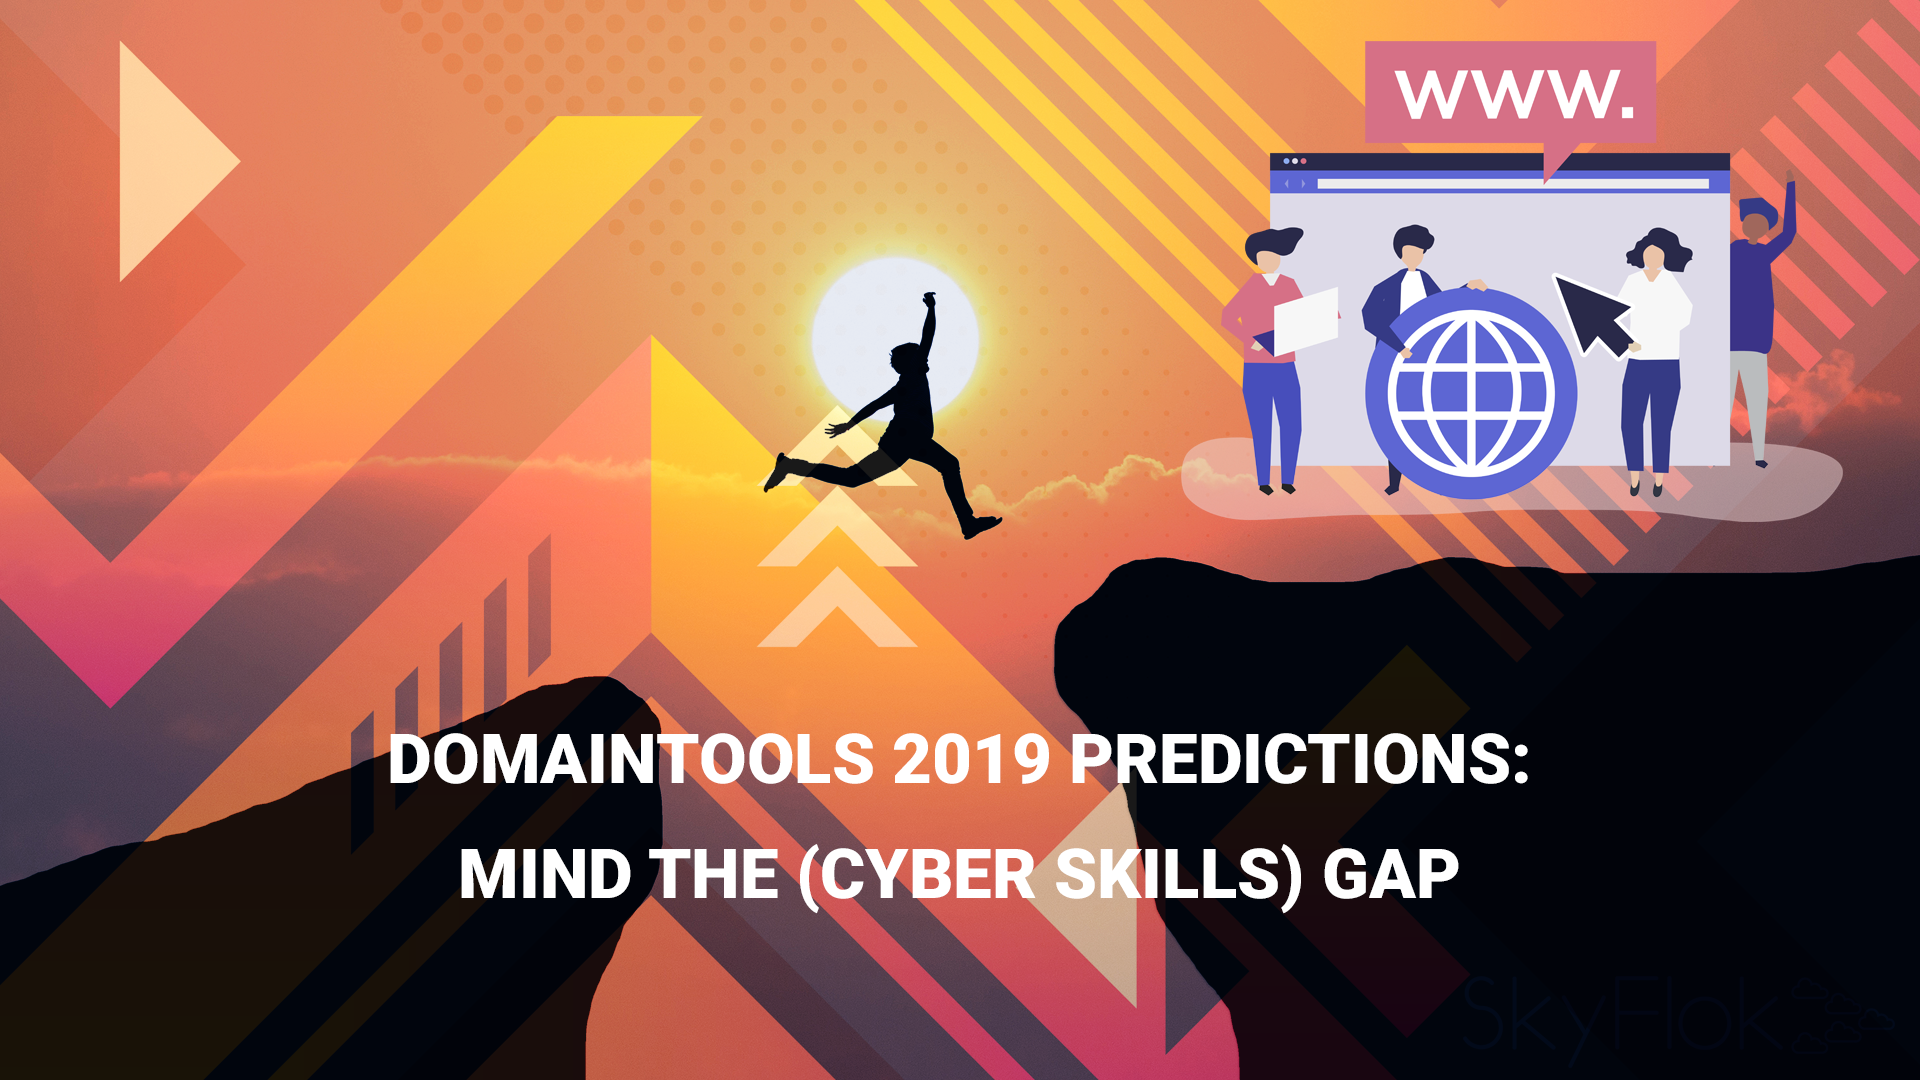 You are currently viewing DomainTools 2019 Predictions: Mind the (Cyber Skills) Gap